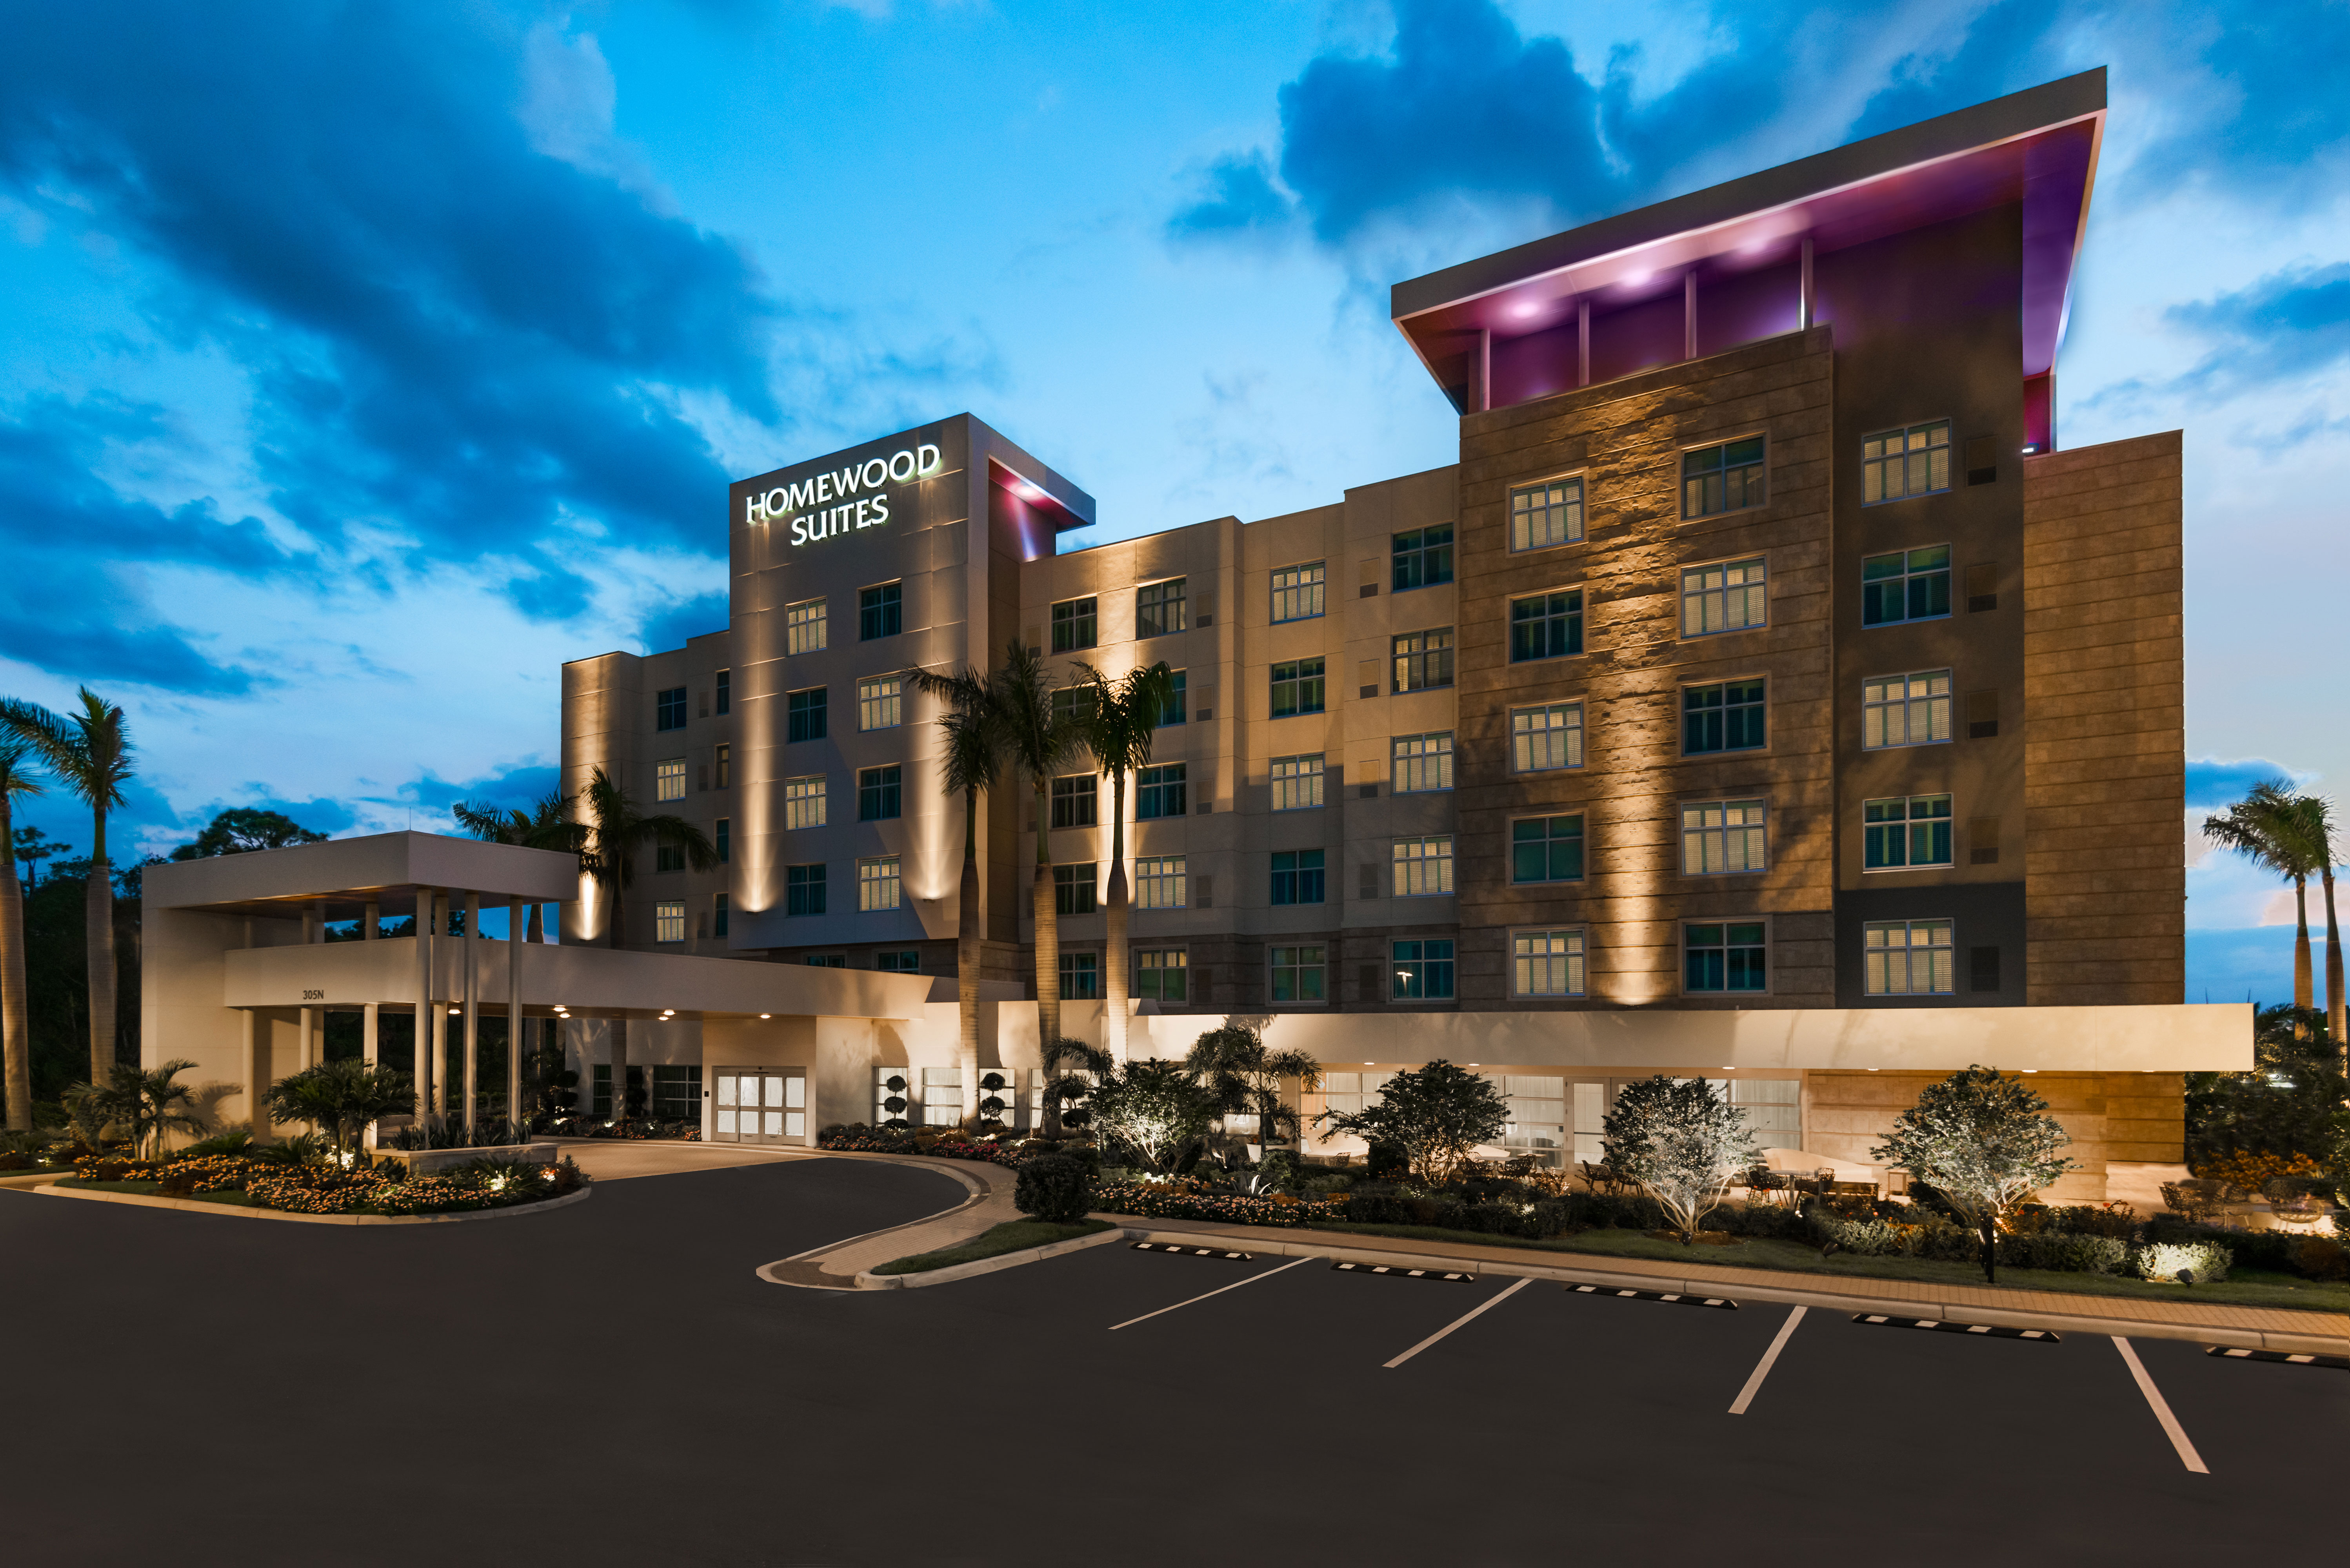 Angled View of Hotel Exterior, Signage, Landscaping, Circle Drive and Parking Lot Lit Up at Dusk